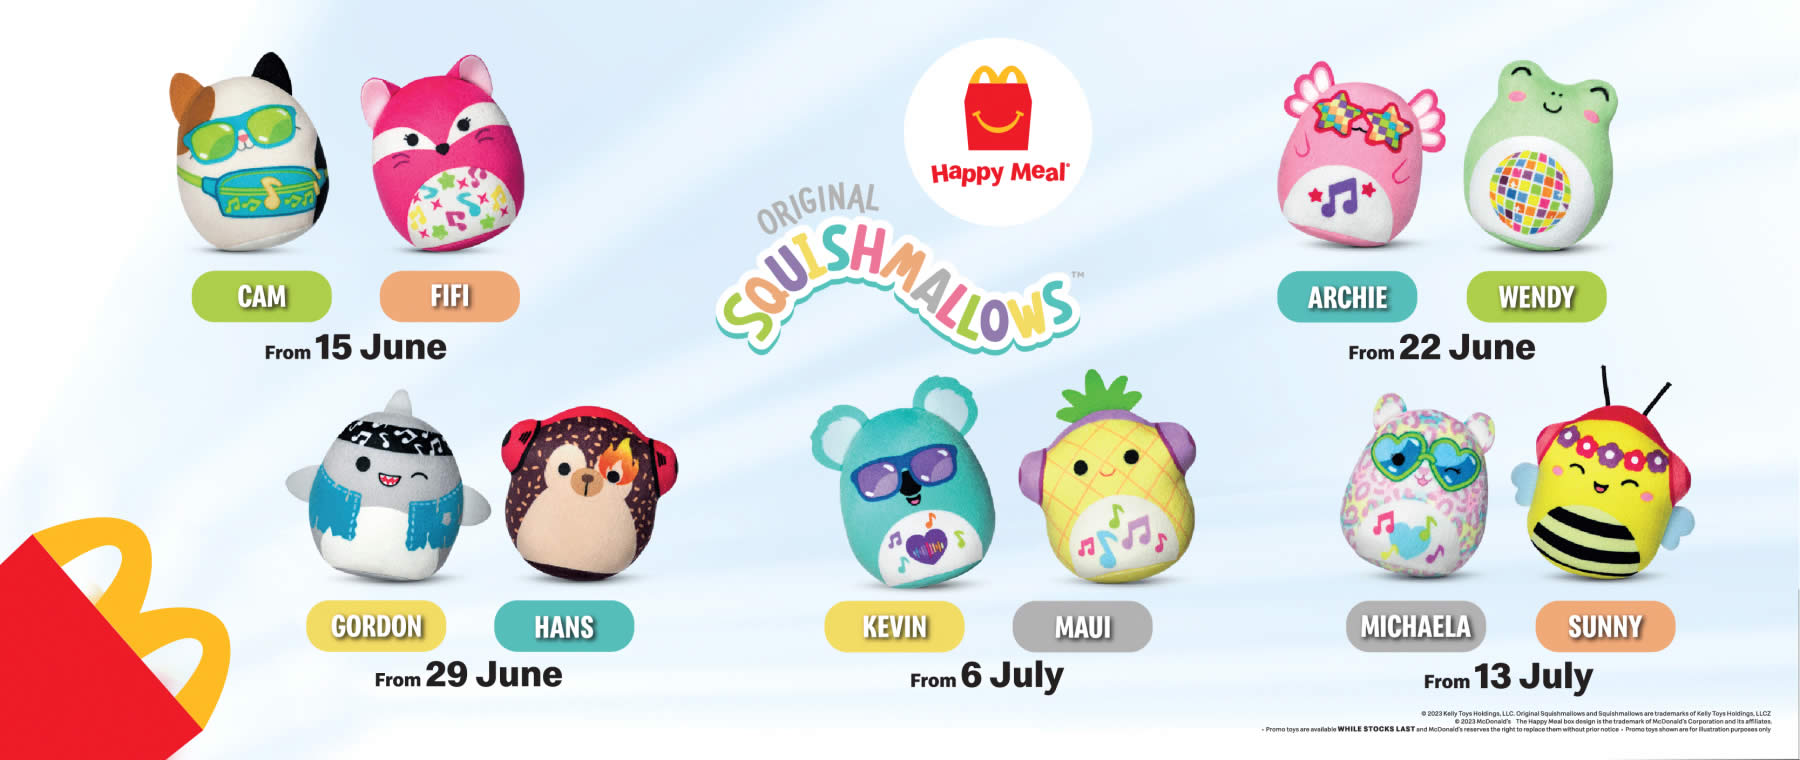 McDonald’s M’sia is giving away FREE Squishmallows™ toy with every